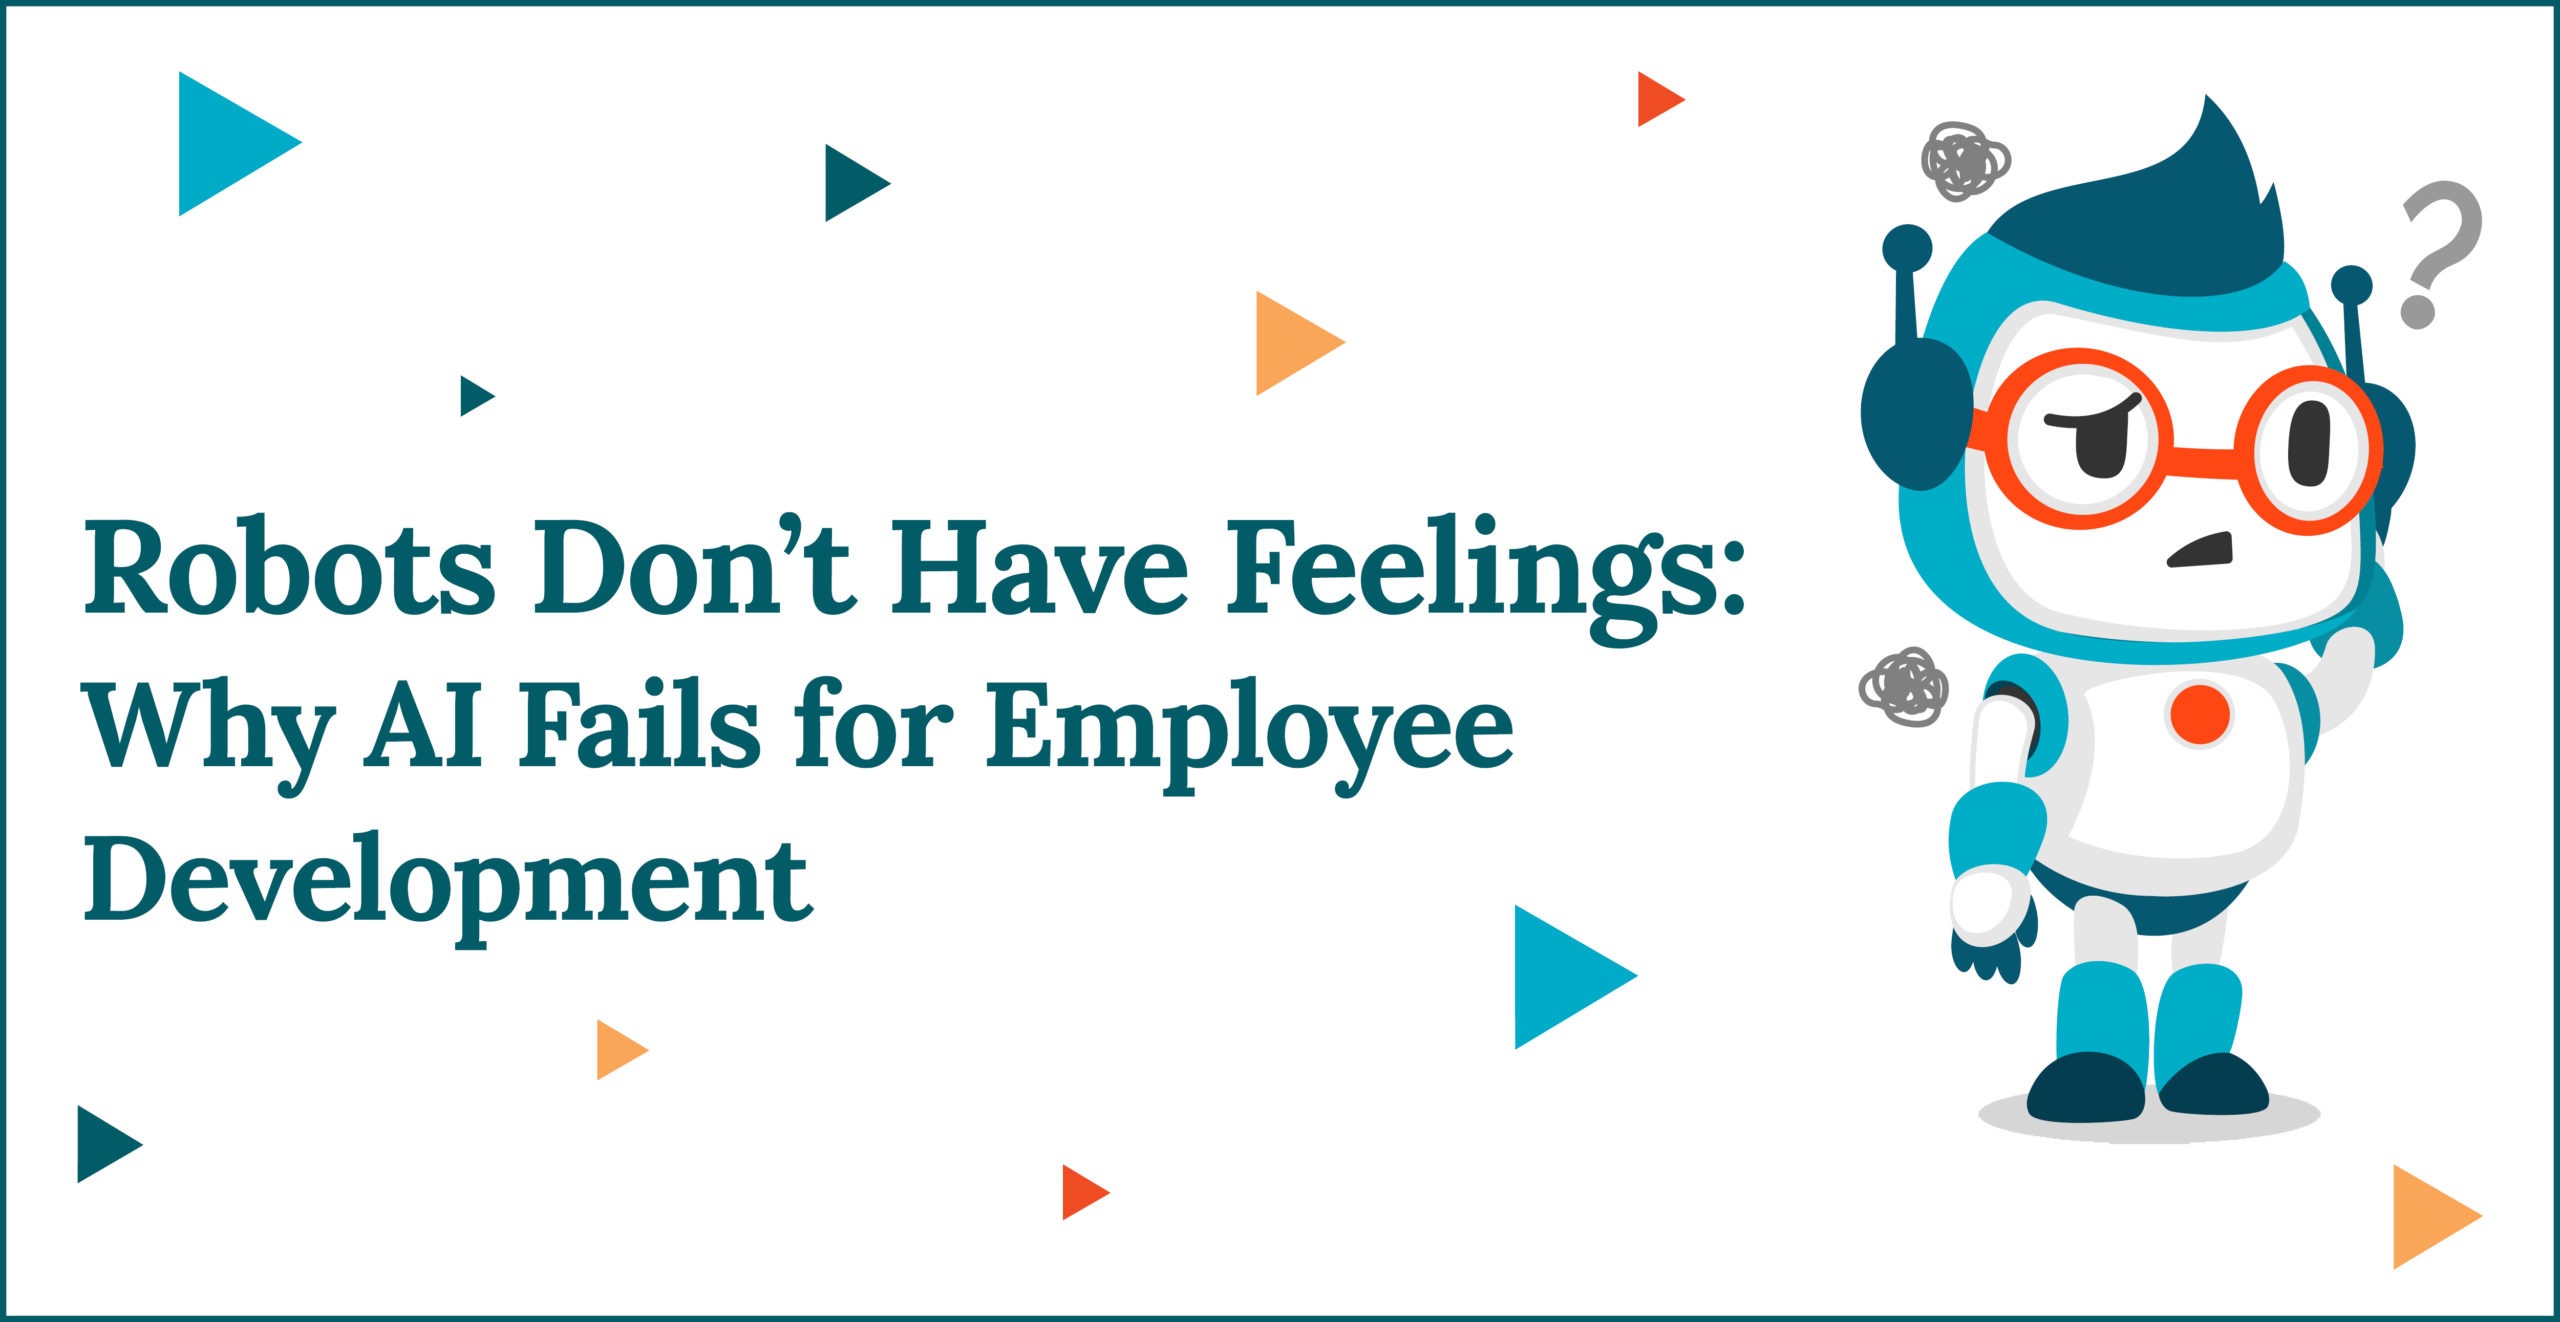 Robots Don’t Have Feelings: Why AI Fails for Employee Development